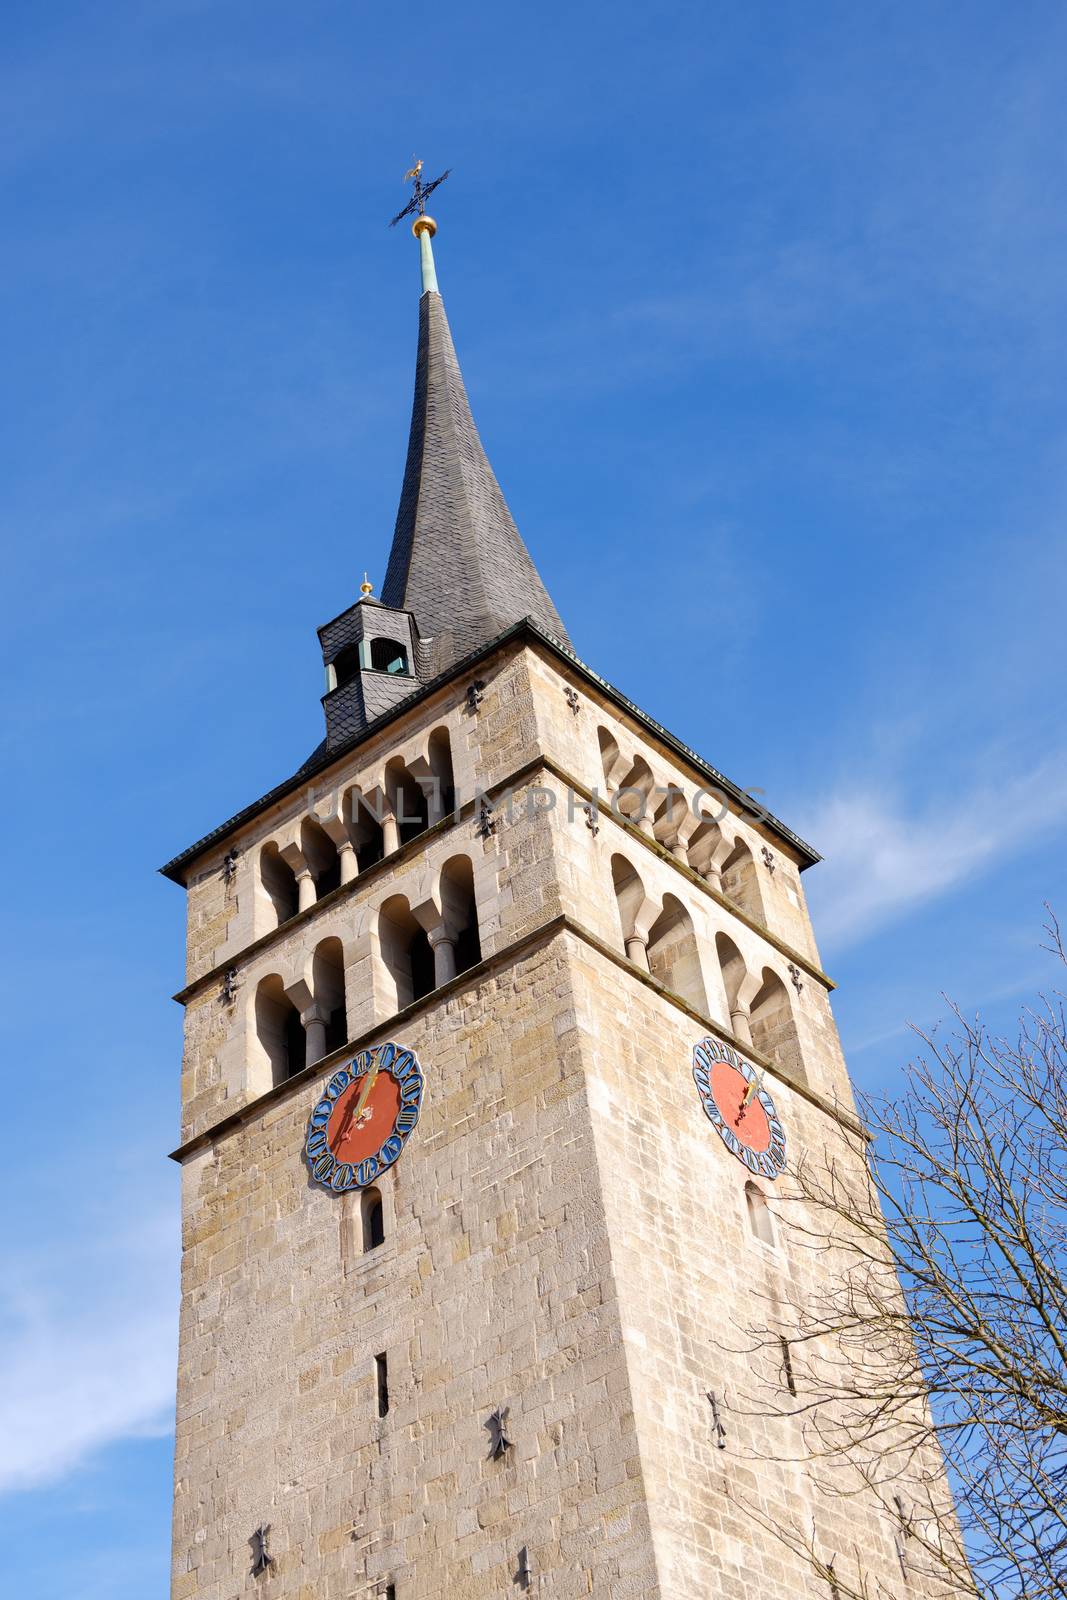 An image of the famous church Martinskirche in Sindelfingen germany